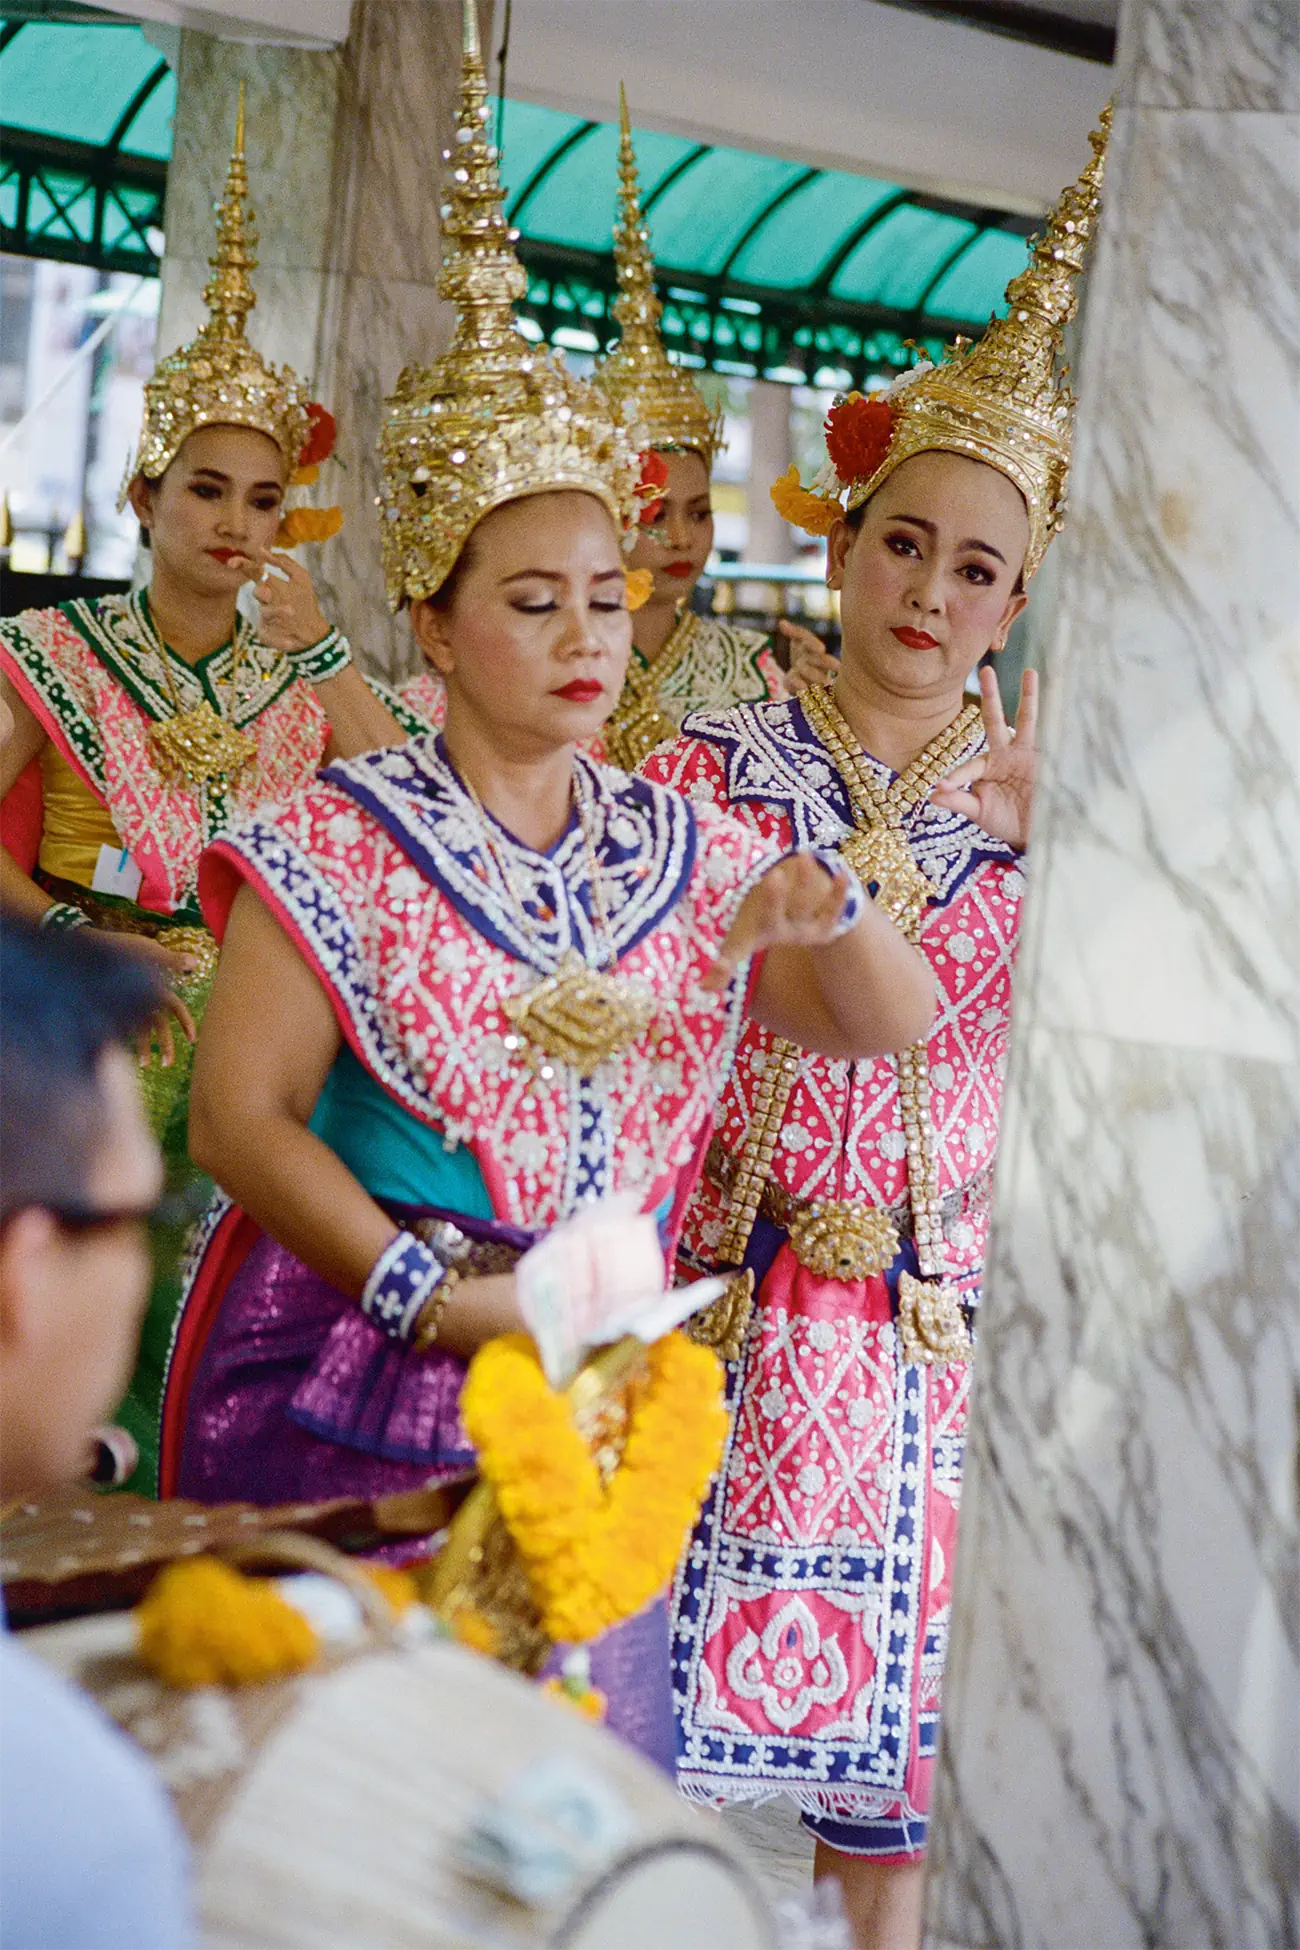 How To Spend It's October 28th, 2023 issue explores the vibrant hues and culture of Bangkok